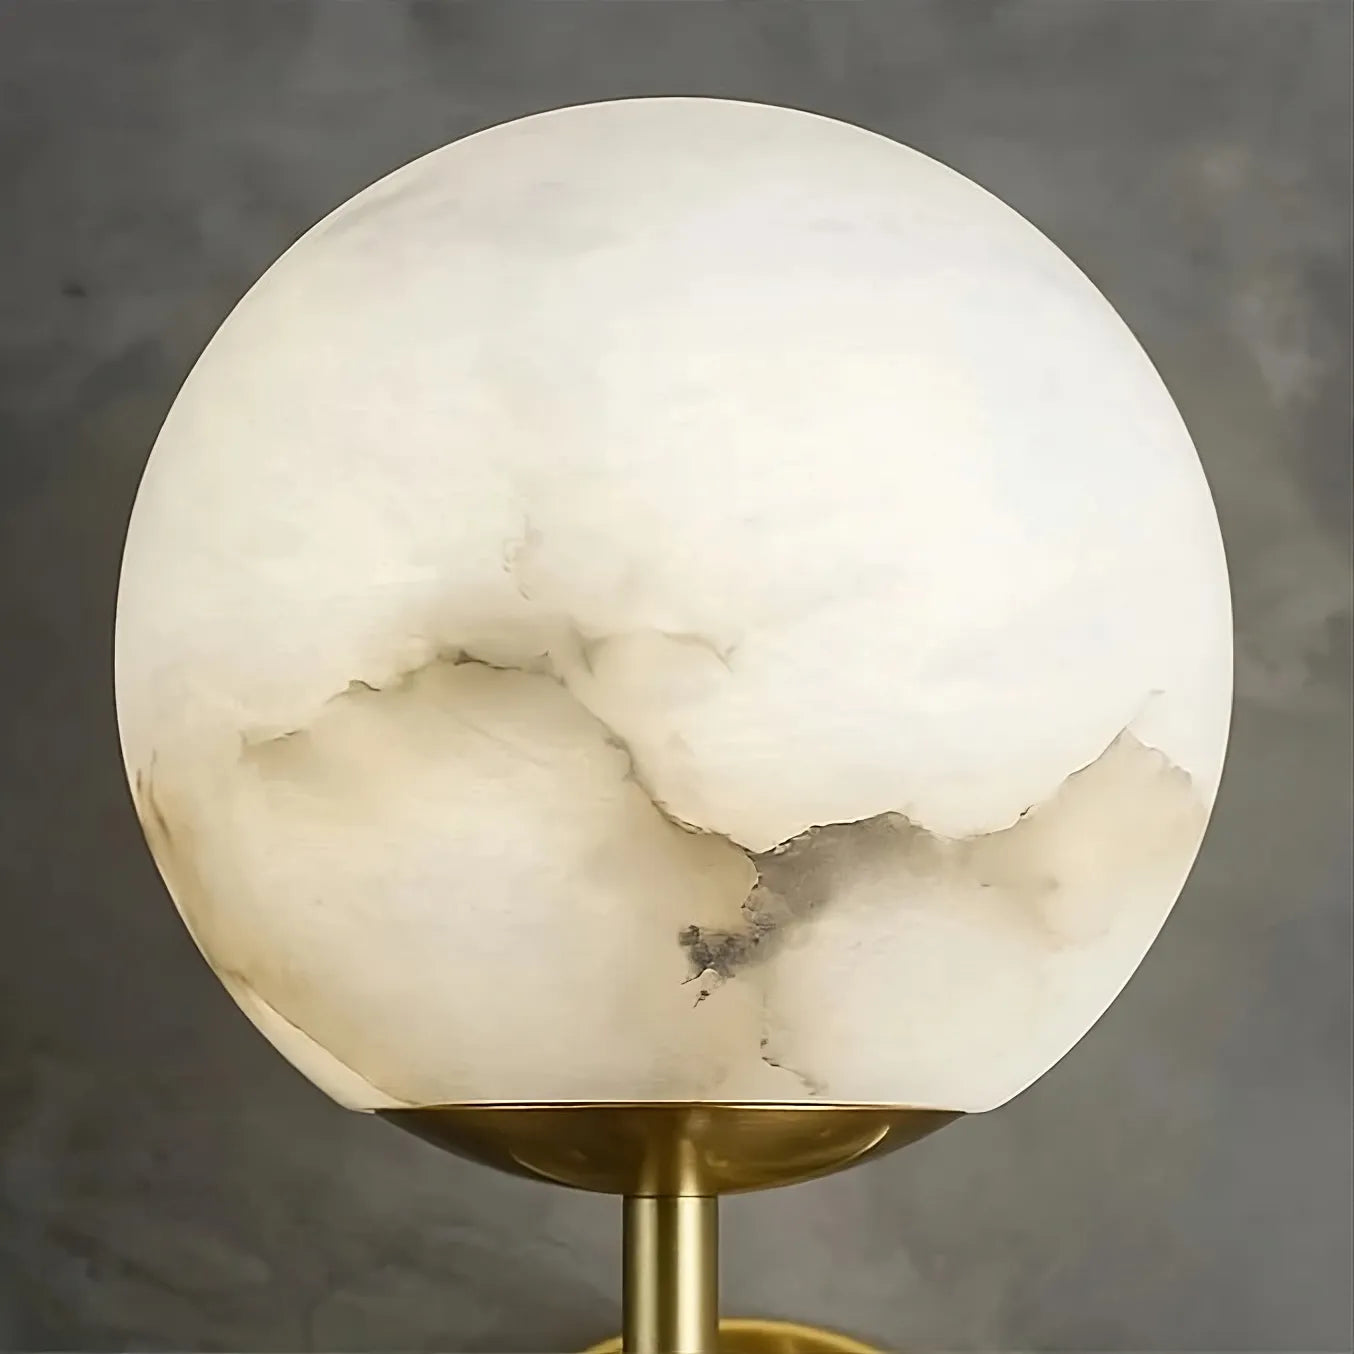 The Natural Marble Sphere Wall Sconce from Morsale.com, with unique sedimentary patterns in shades of white and gray, is mounted on a brass-colored stand, casting a warm glow against a soft gray background.